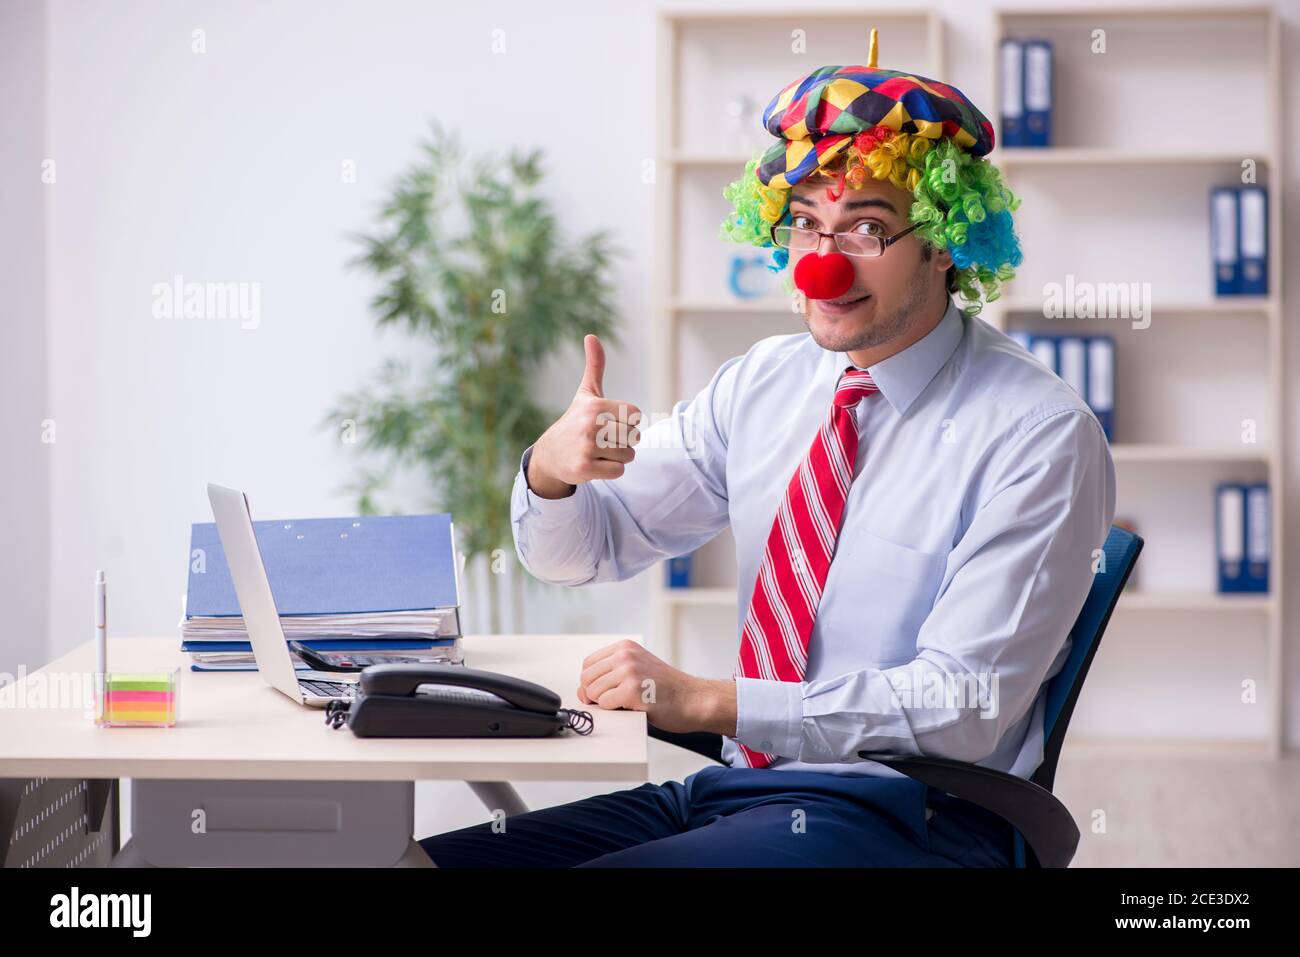 funny-employee-clown-working-in-the-office-room-2CE3DX2.jpg